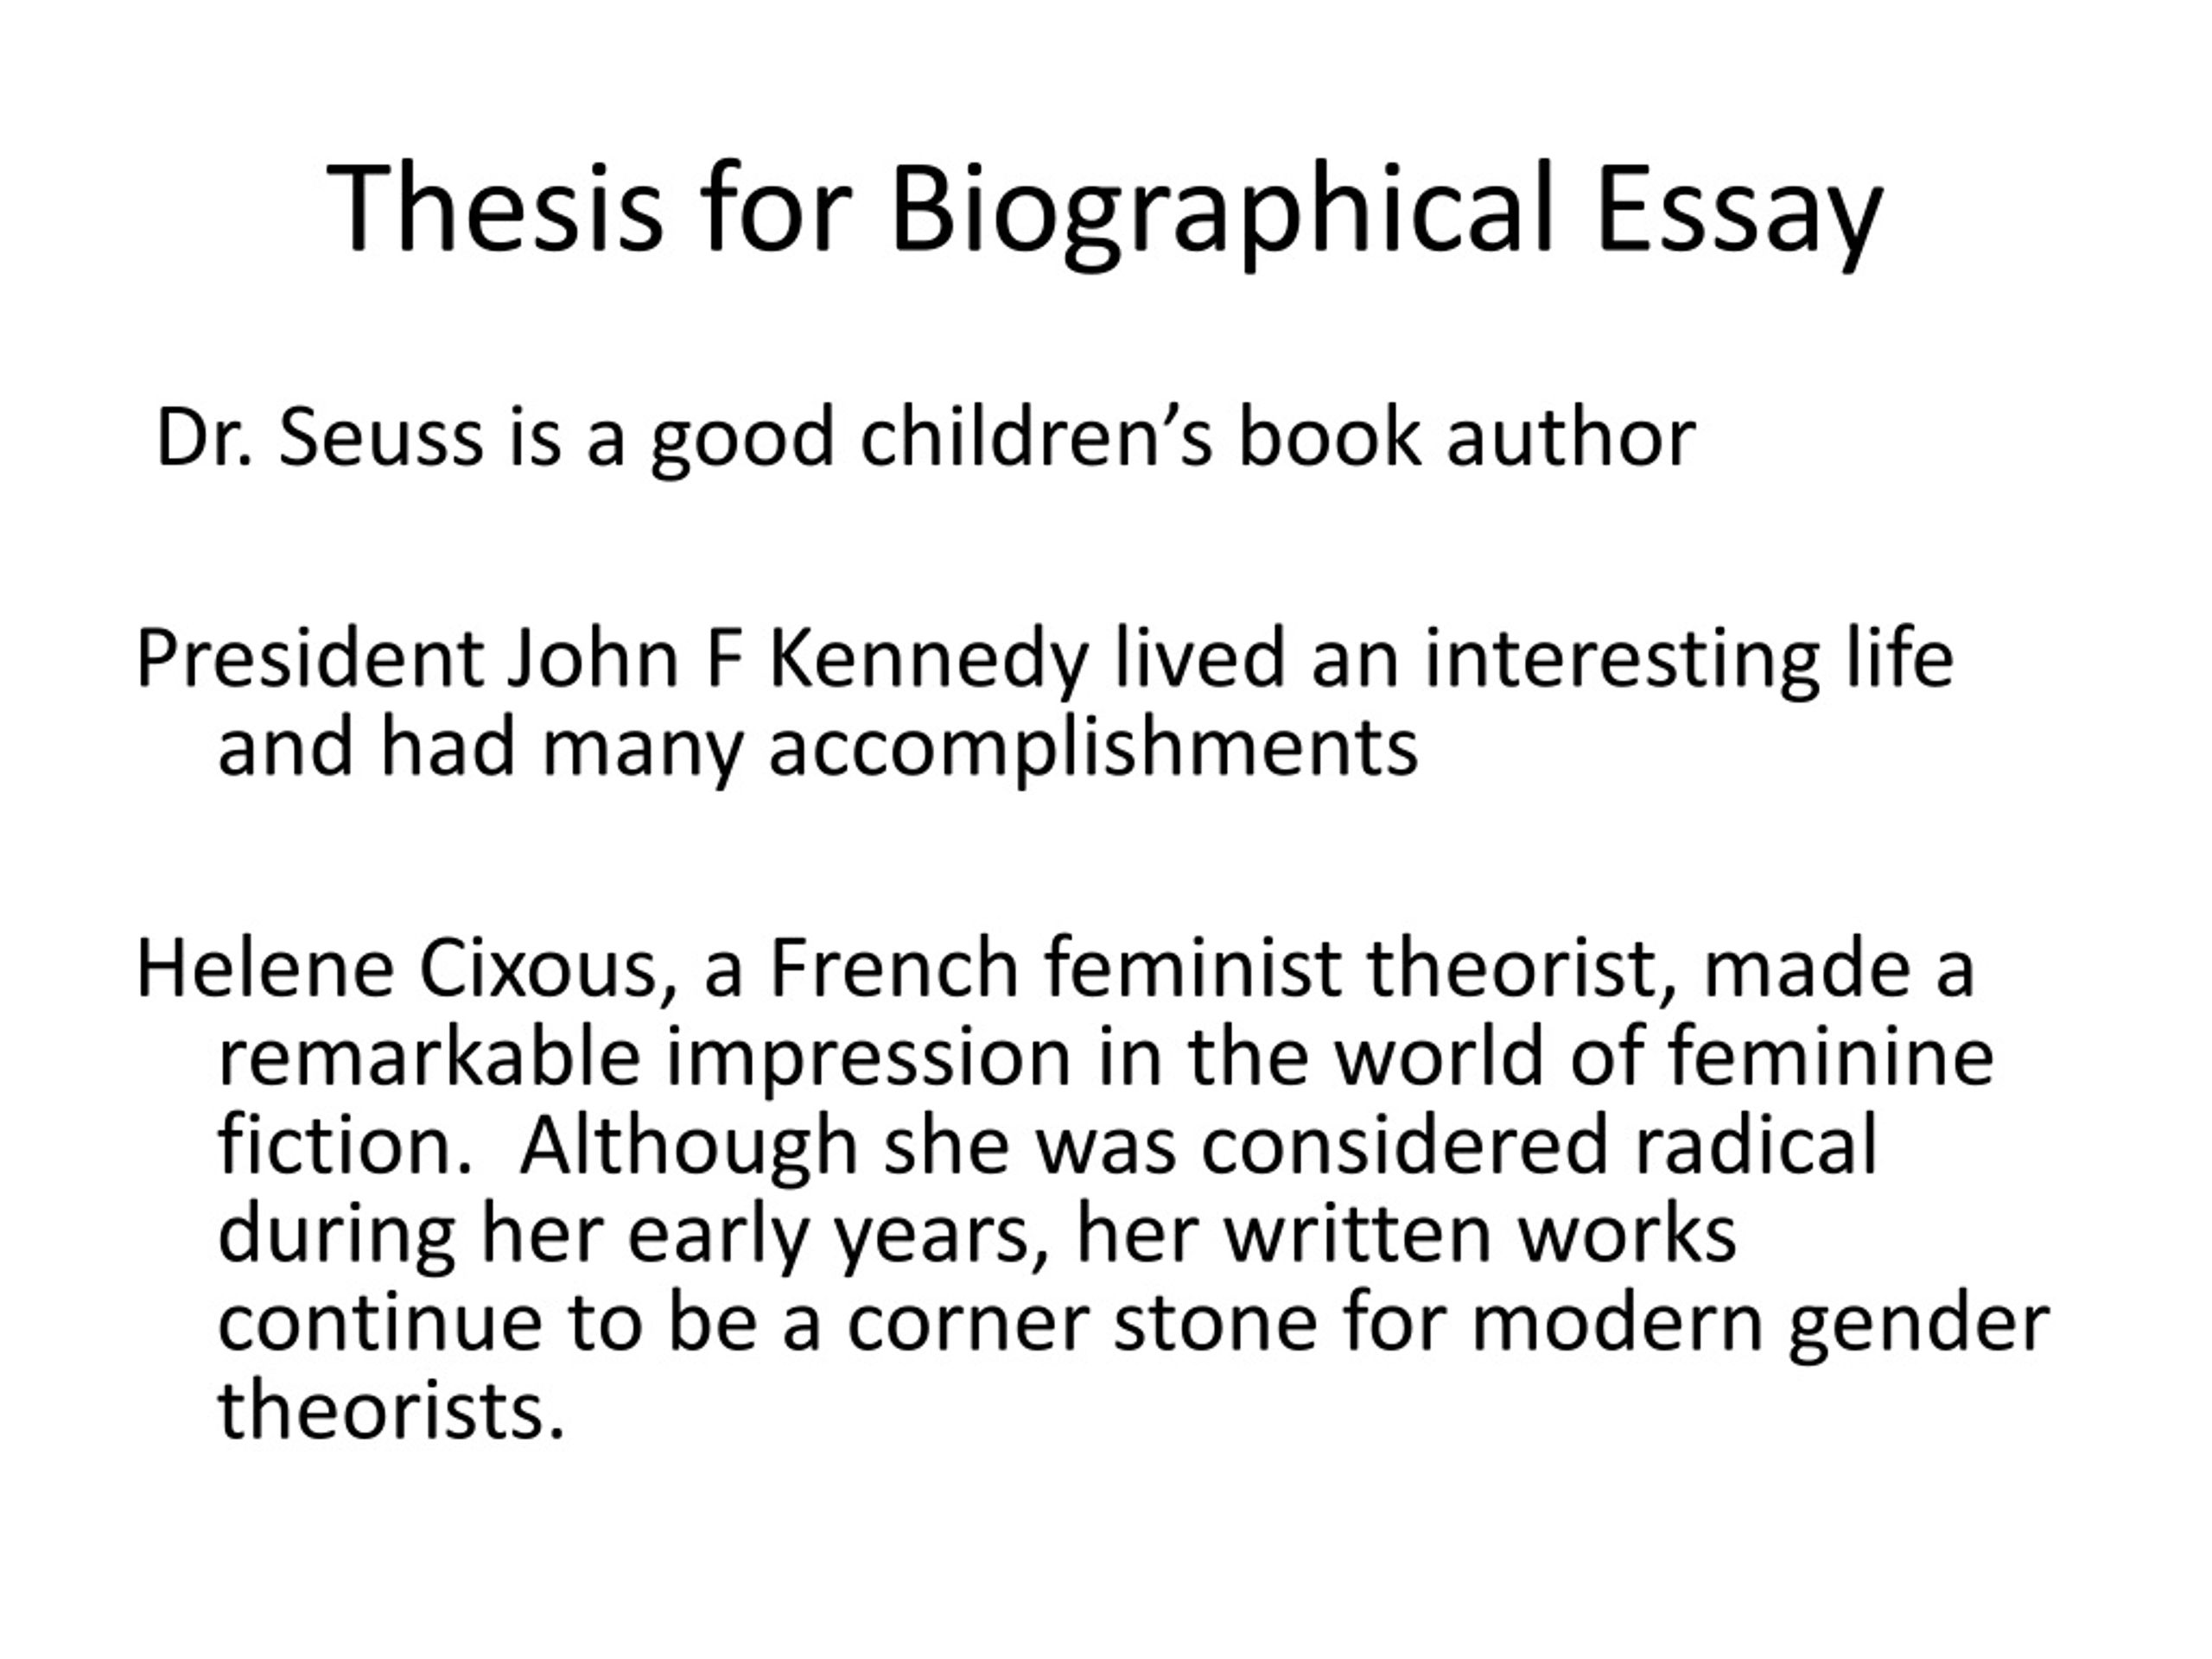 biographical essay means what